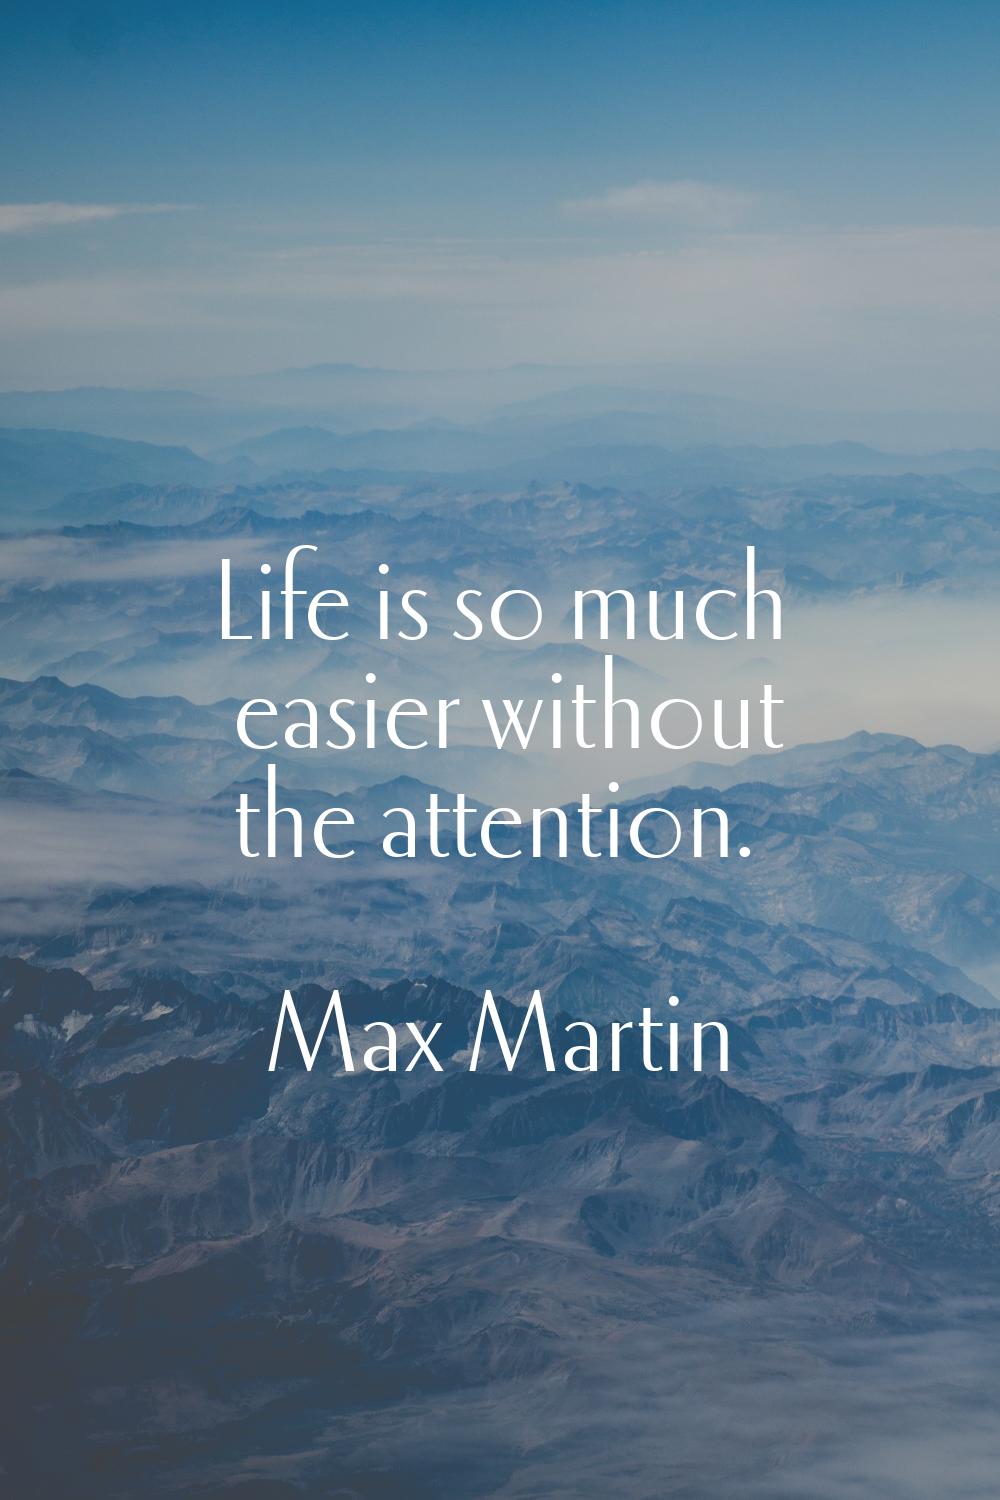 Life is so much easier without the attention.